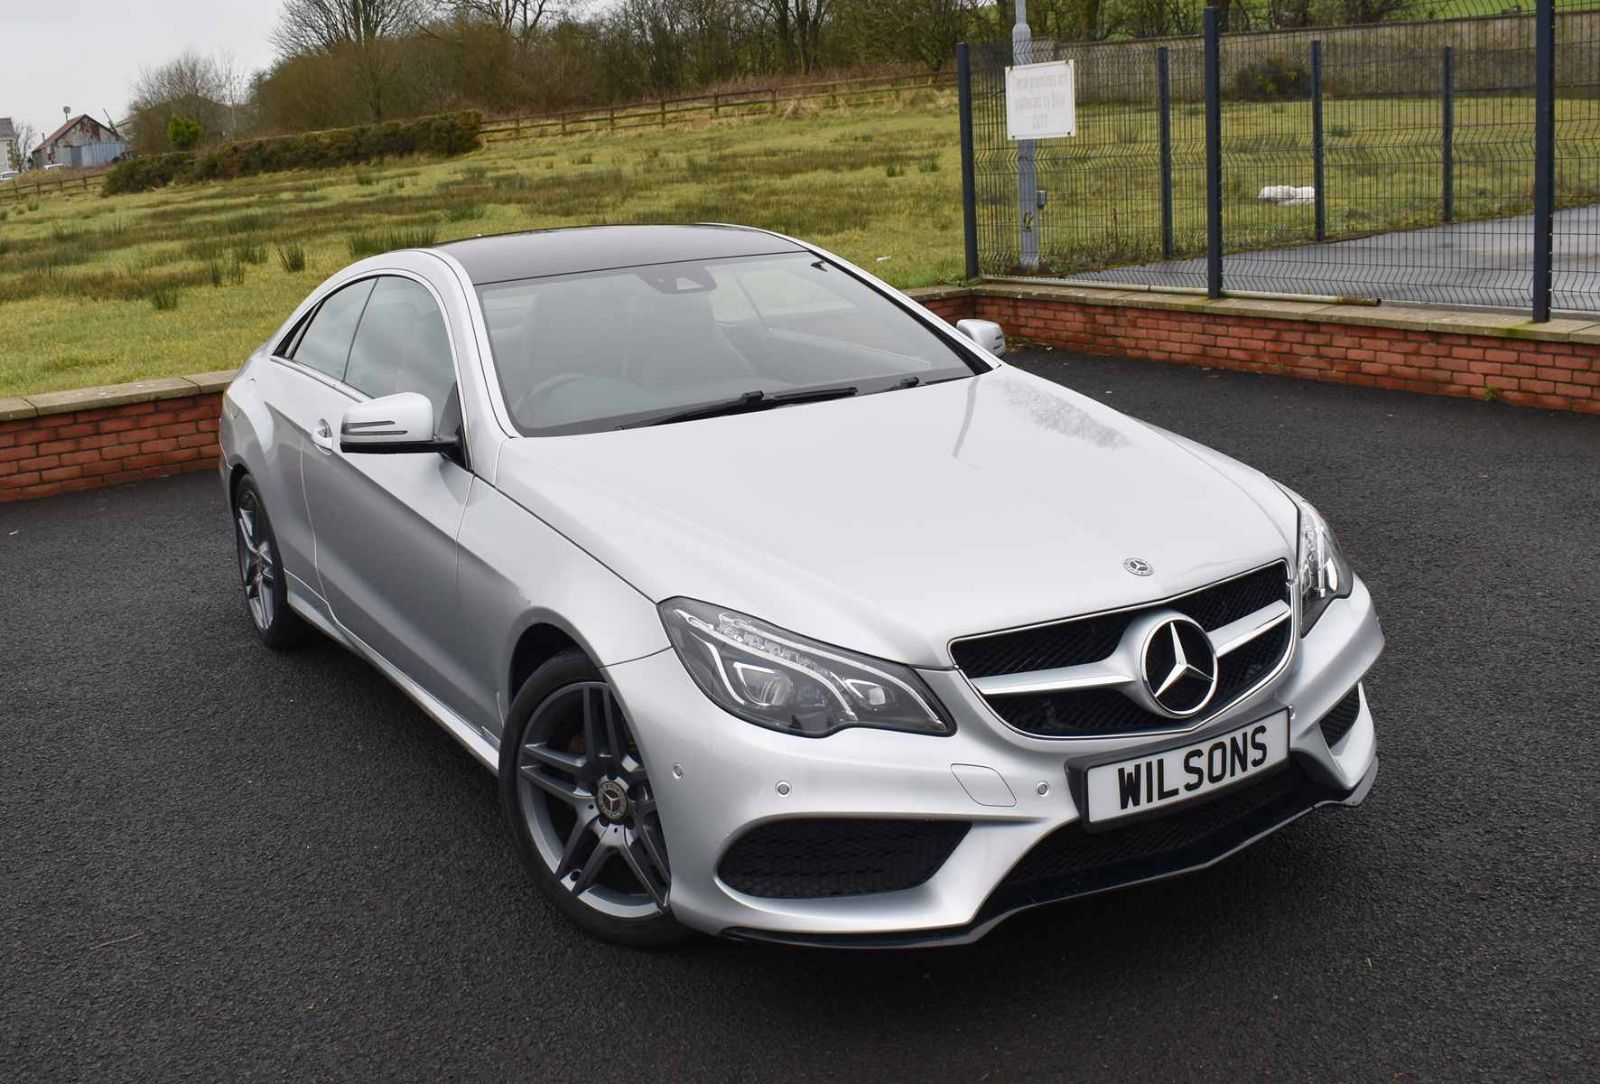 Used Mercedes-Benz E Class Coupe/Cabriolet Northern Ireland